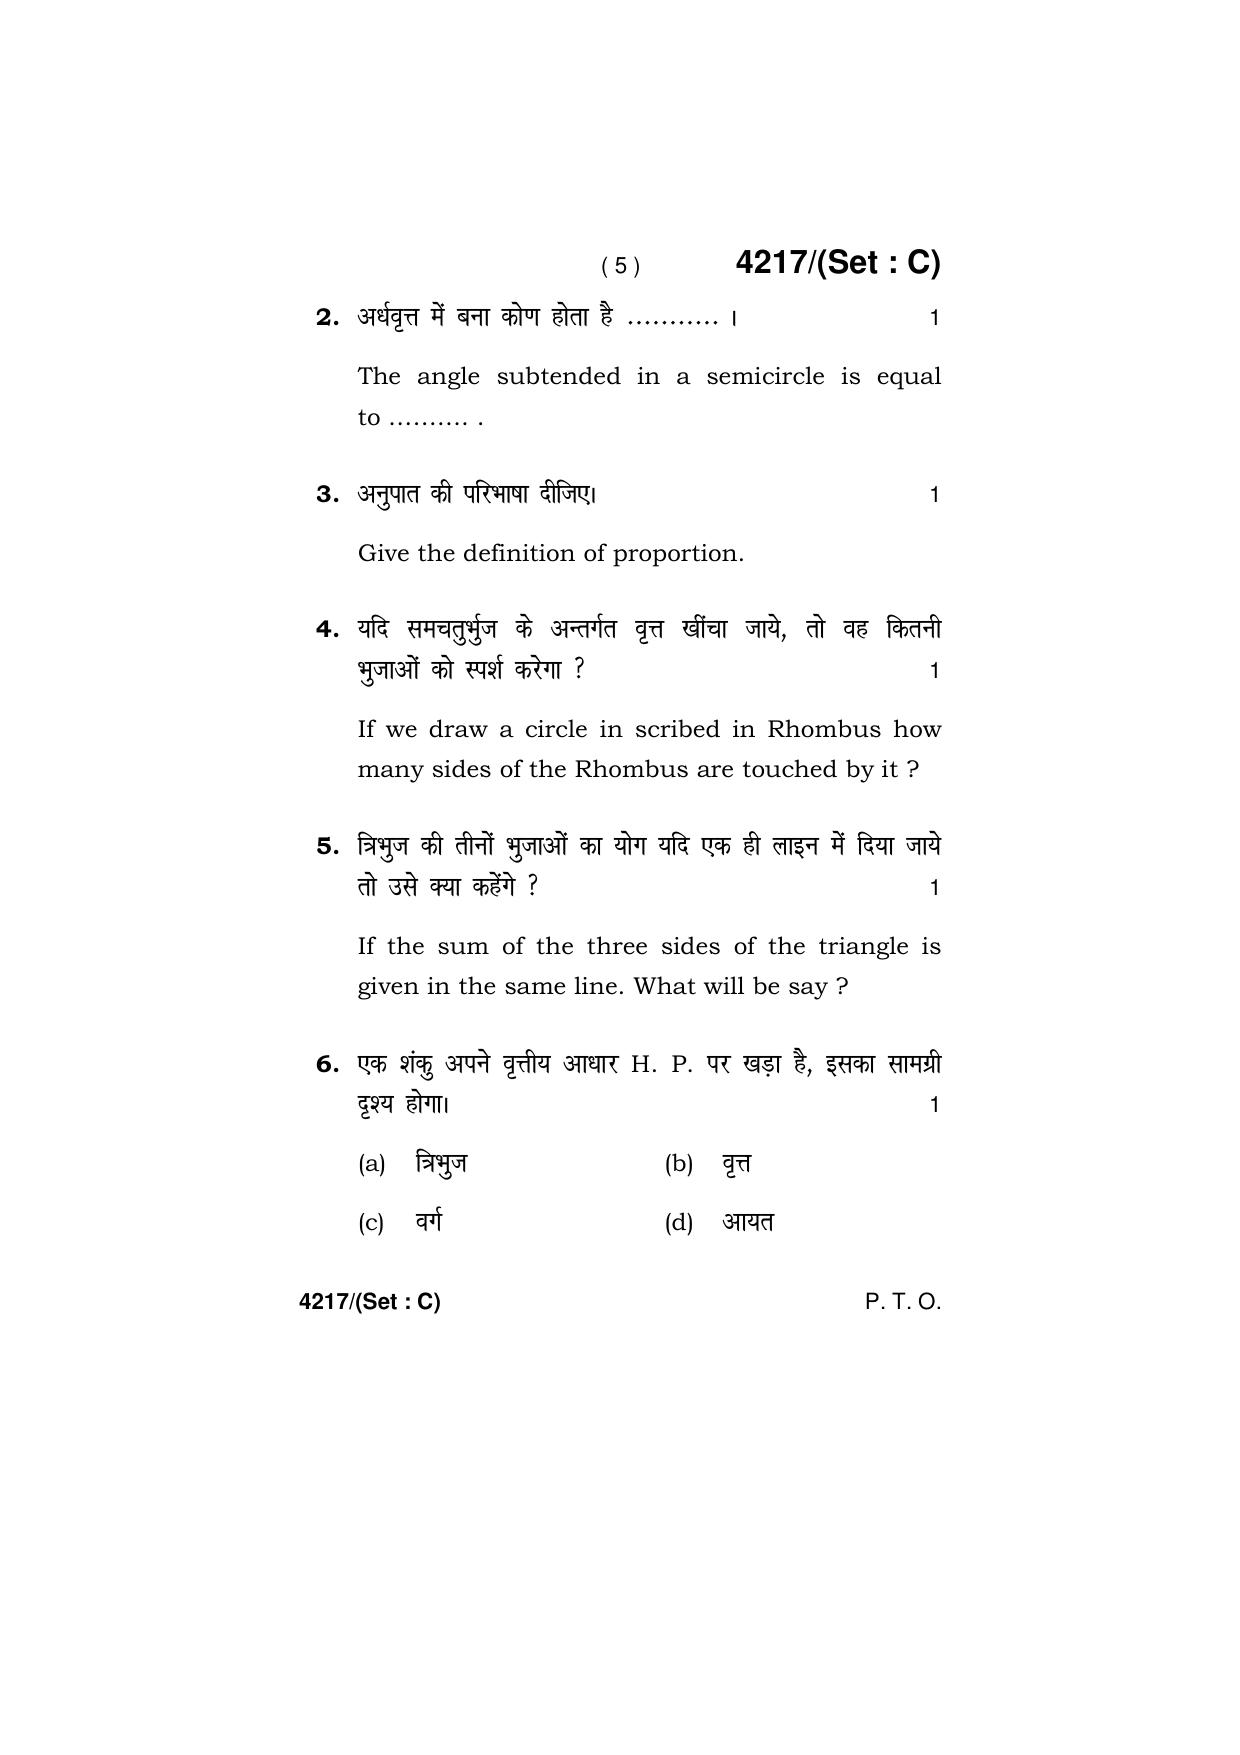 Haryana Board HBSE Class 10 Drawing (All Set) 2019 Question Paper - Page 21